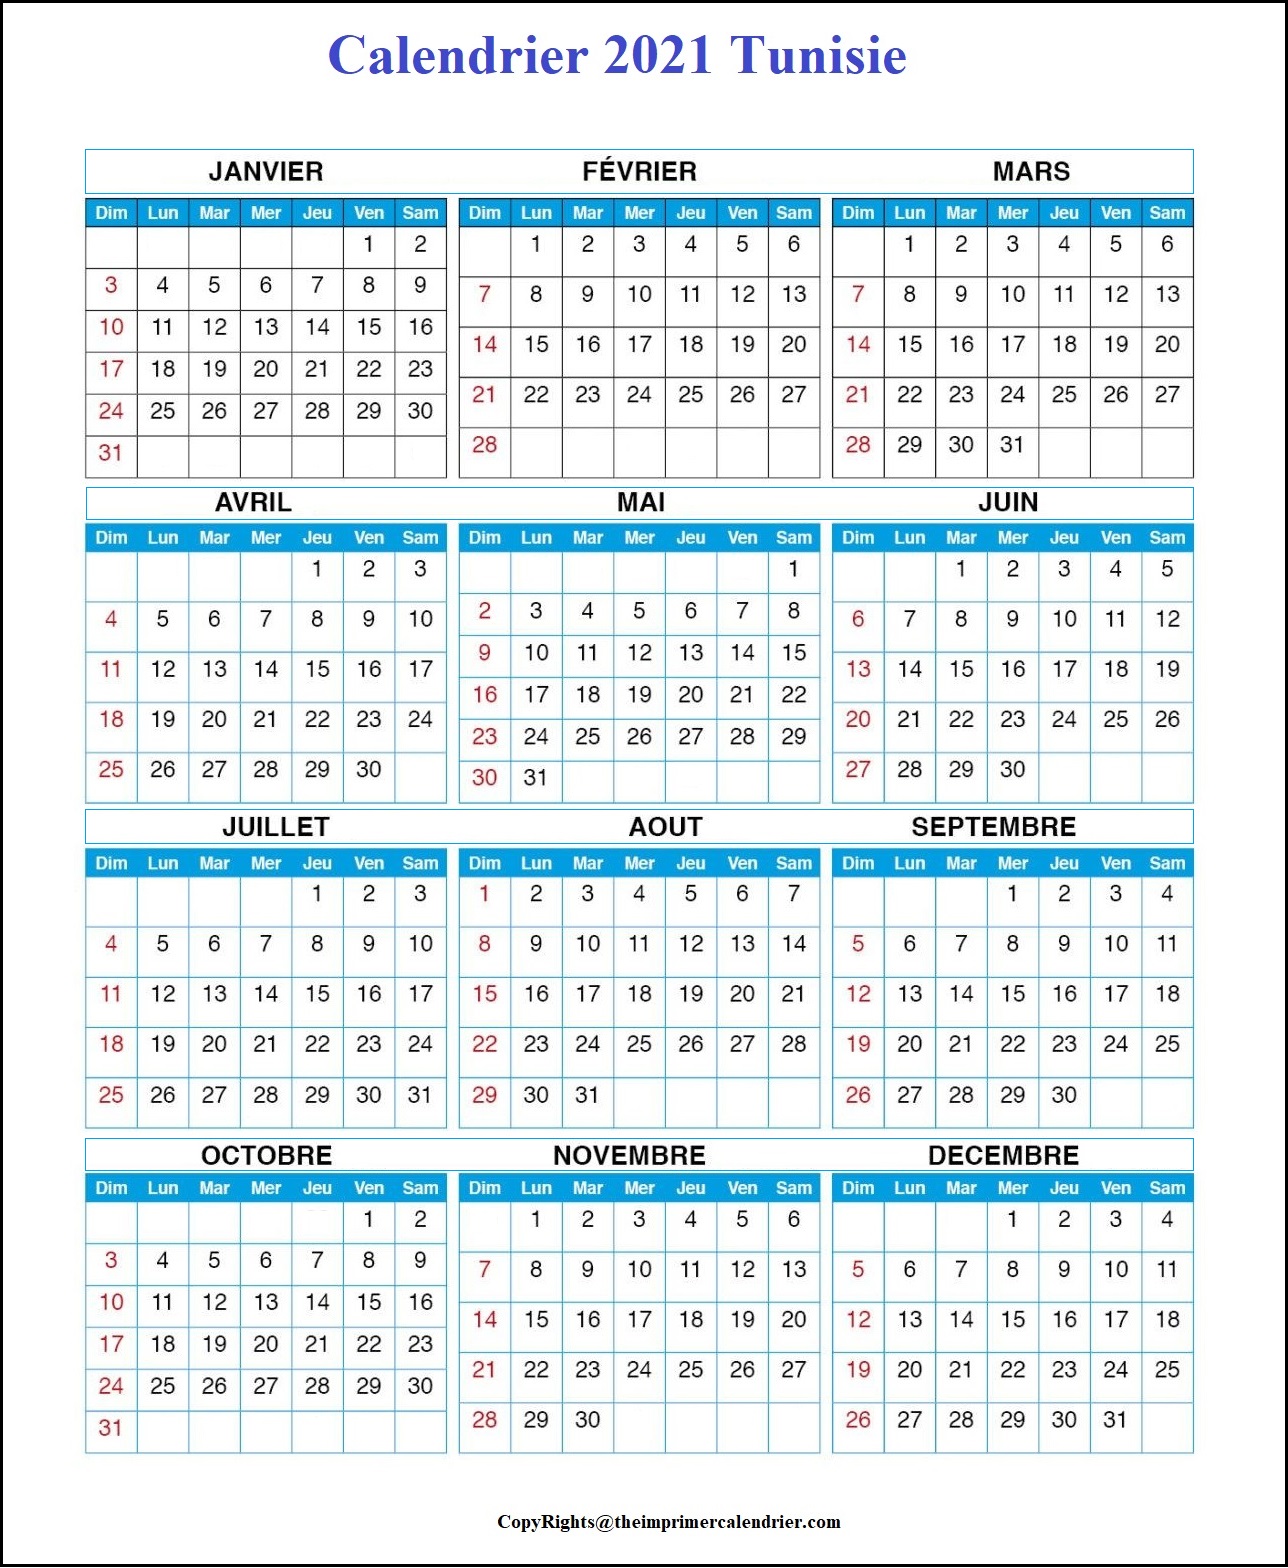 Calendrier Vaccinal Tunisie 2021 Imprimable